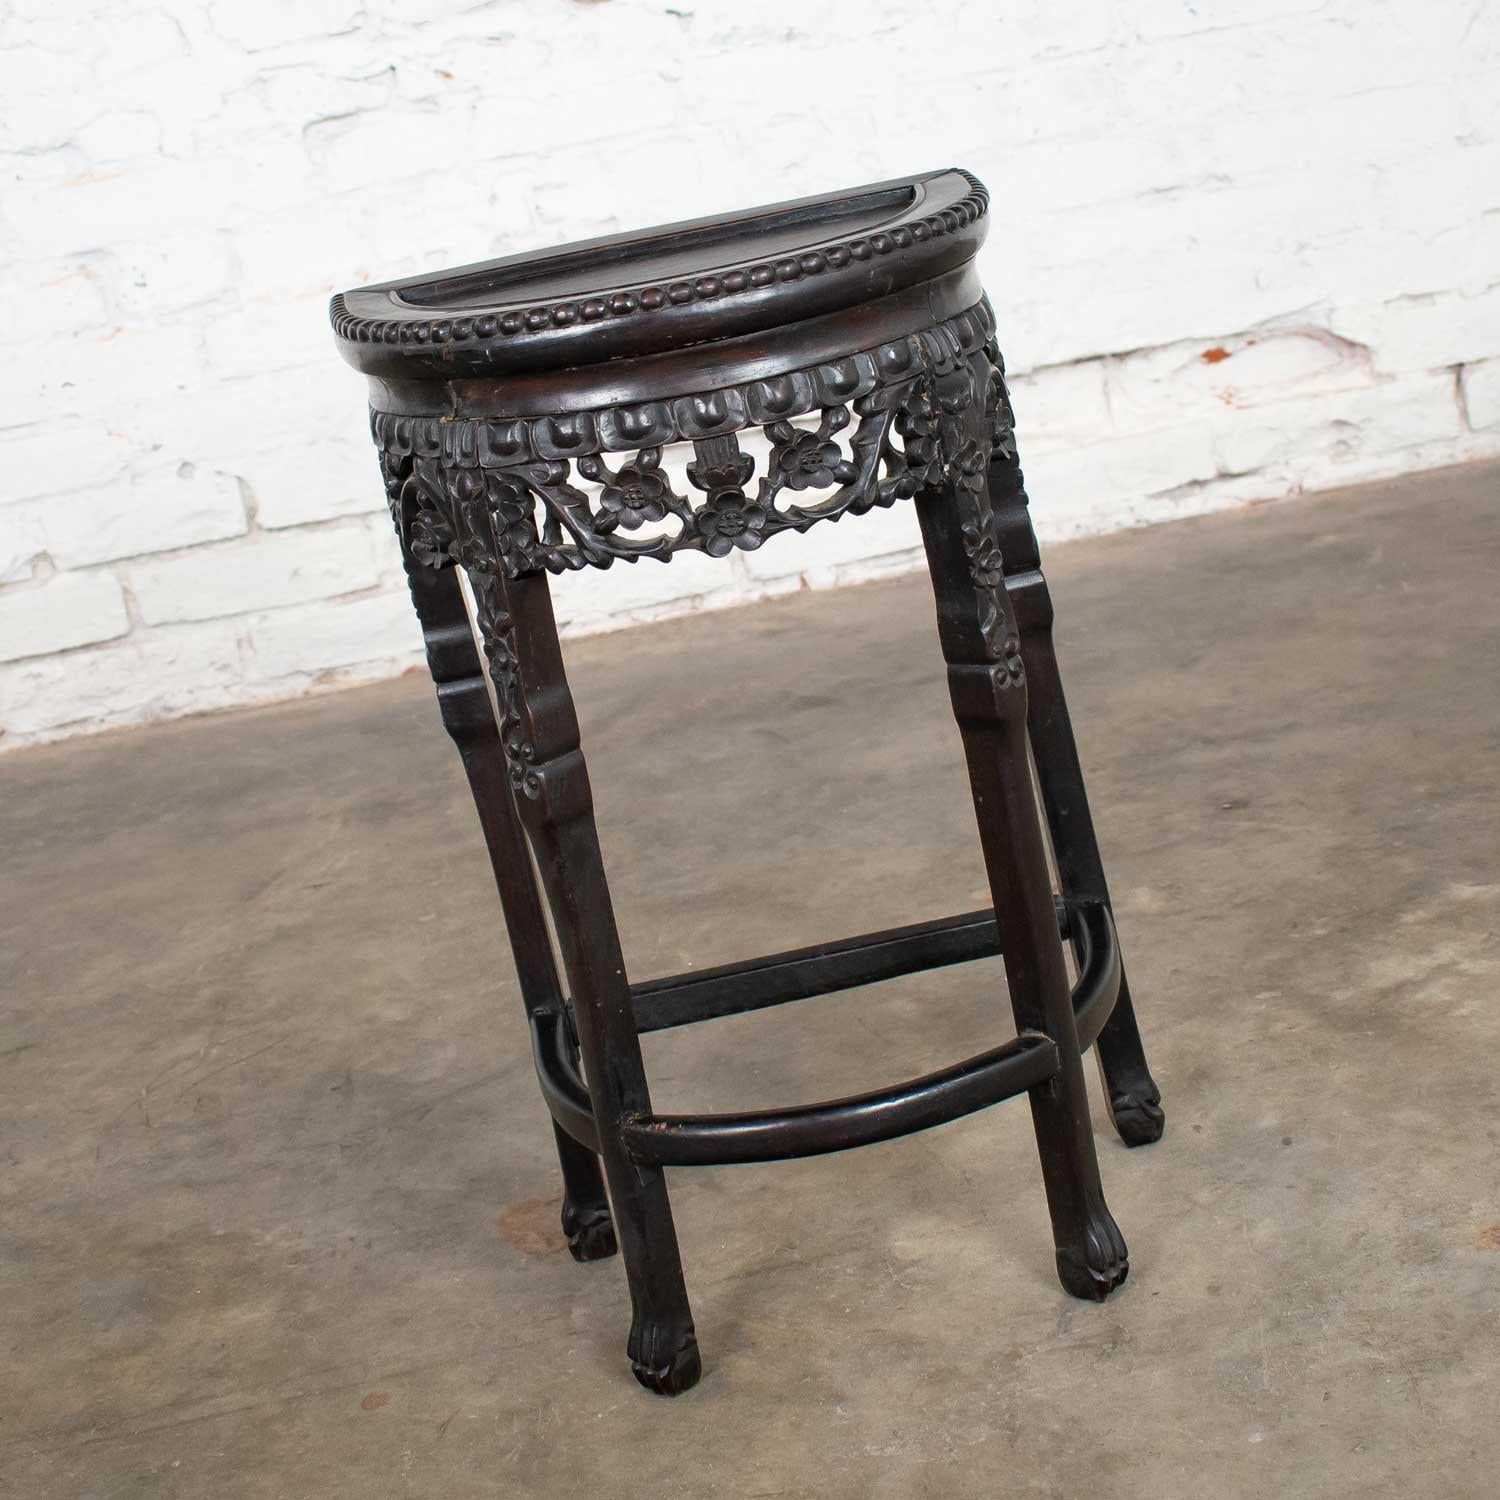 Gorgeous Asian half-moon console table, side table, demilune table or stand comprised of rich Asian hardwoods and a hand carved cherry blossom apron and pearl beading wood trim. It is in beautiful vintage condition with age appropriate cracks and